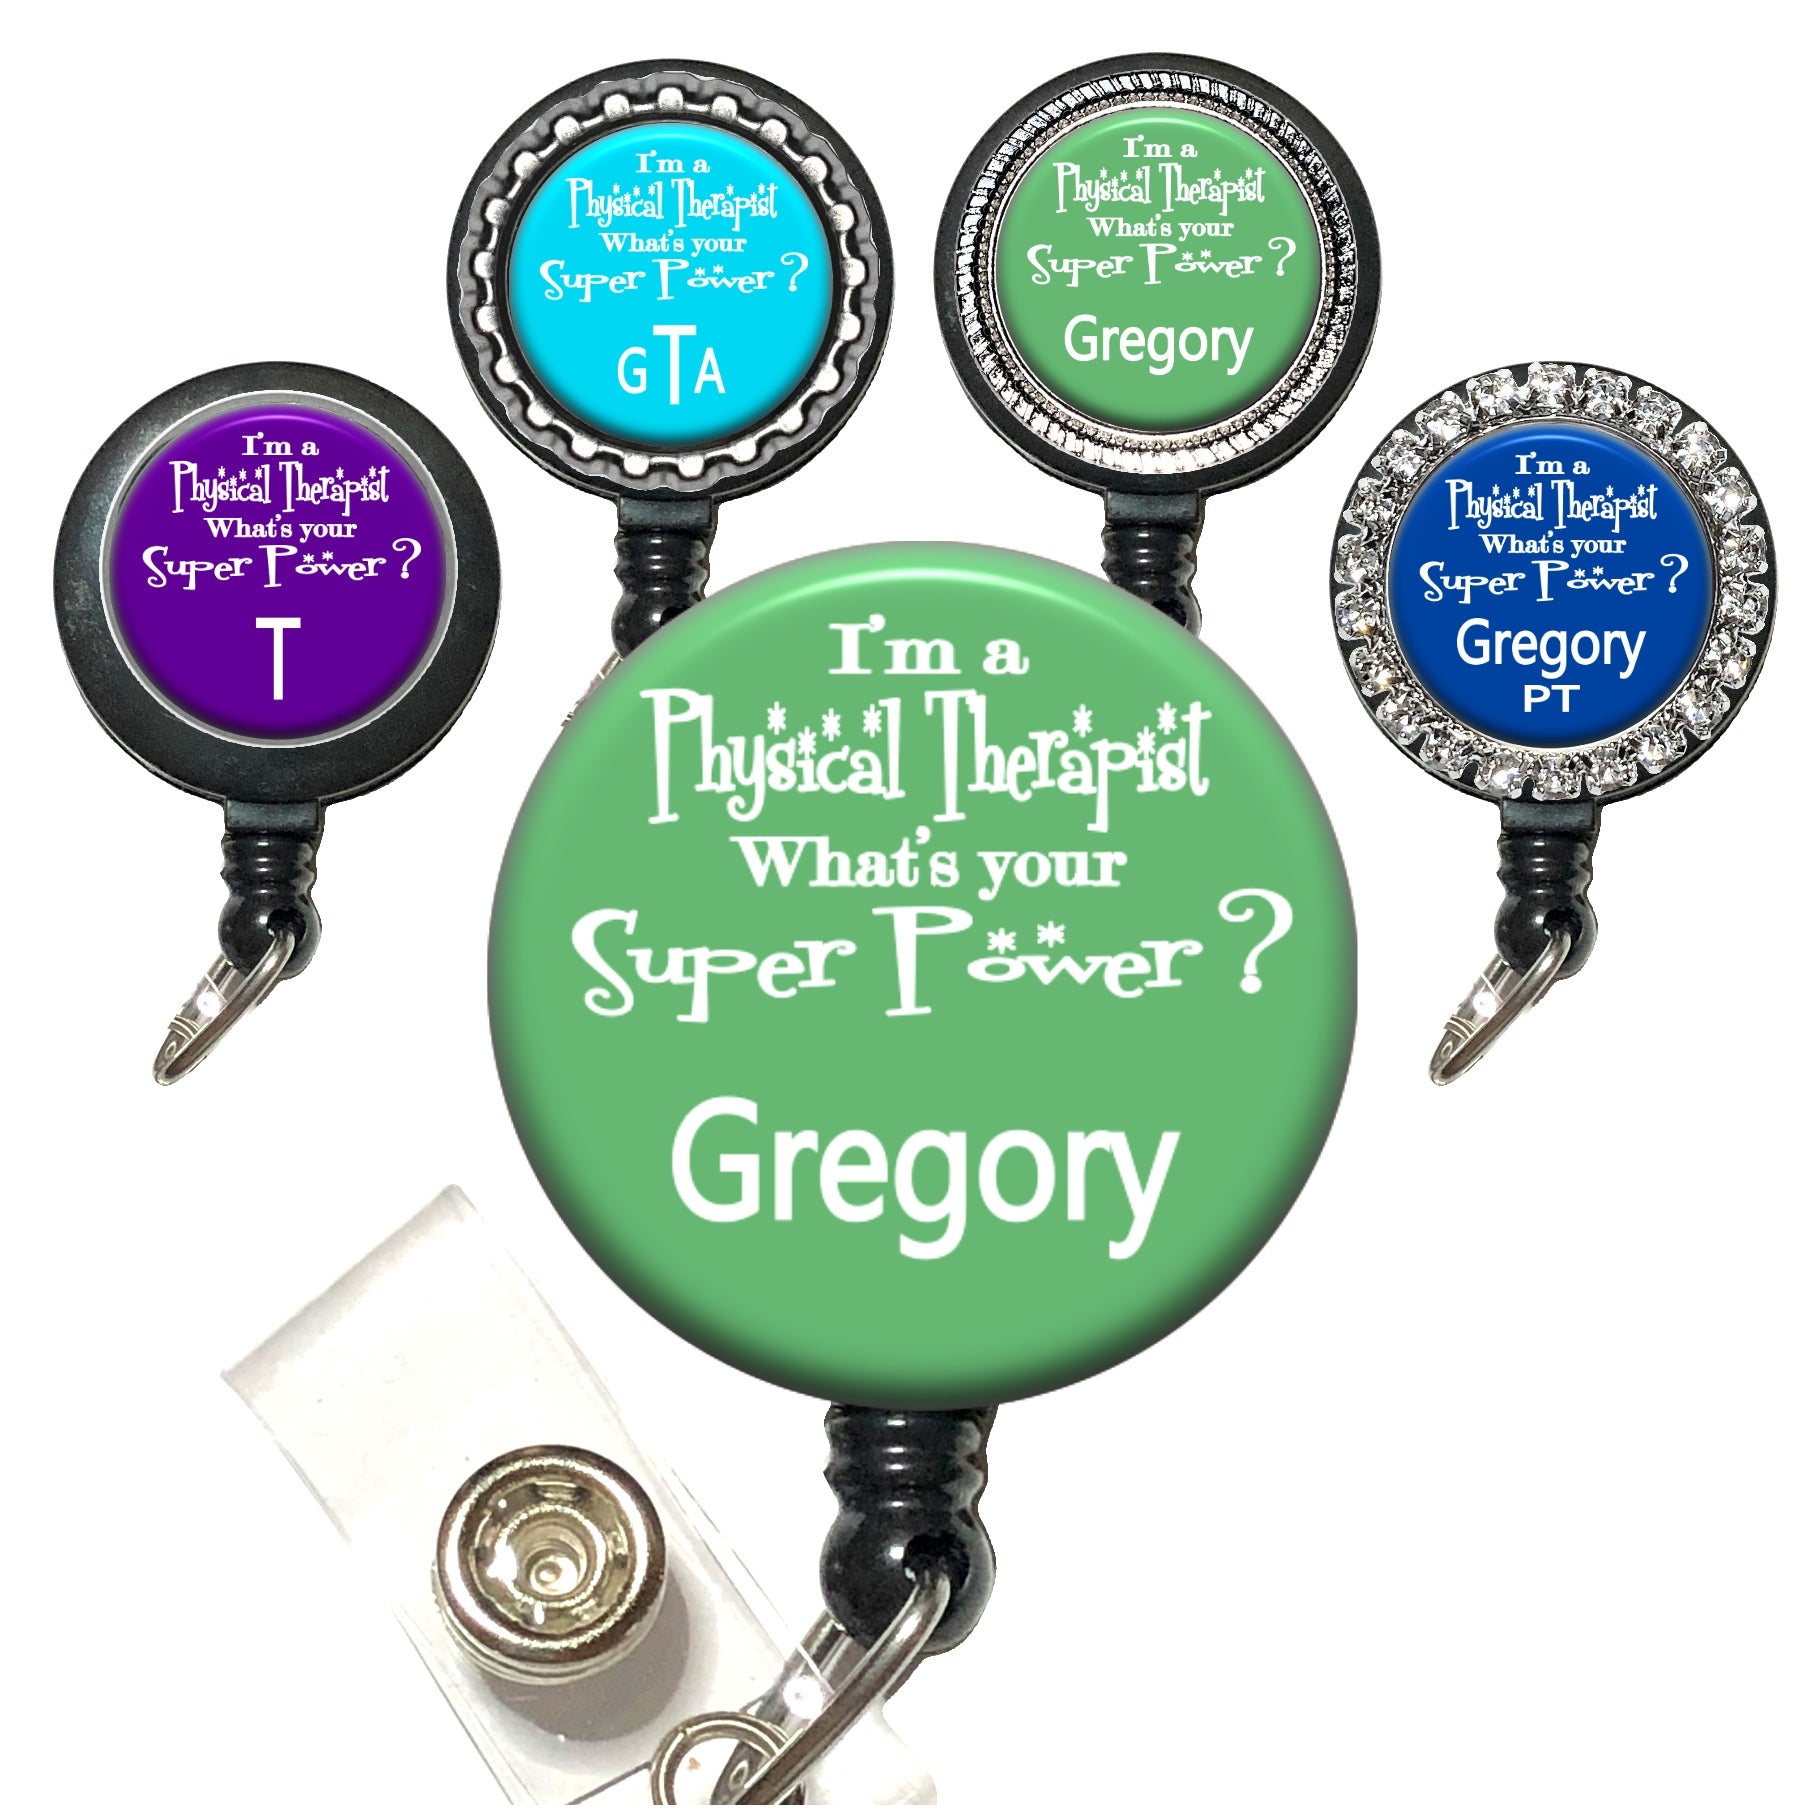  EKG Heart Badge Reel Id Holder - 8 Design Colors, Personalized  Name, Monogram, Occupation, Extends 34 inches